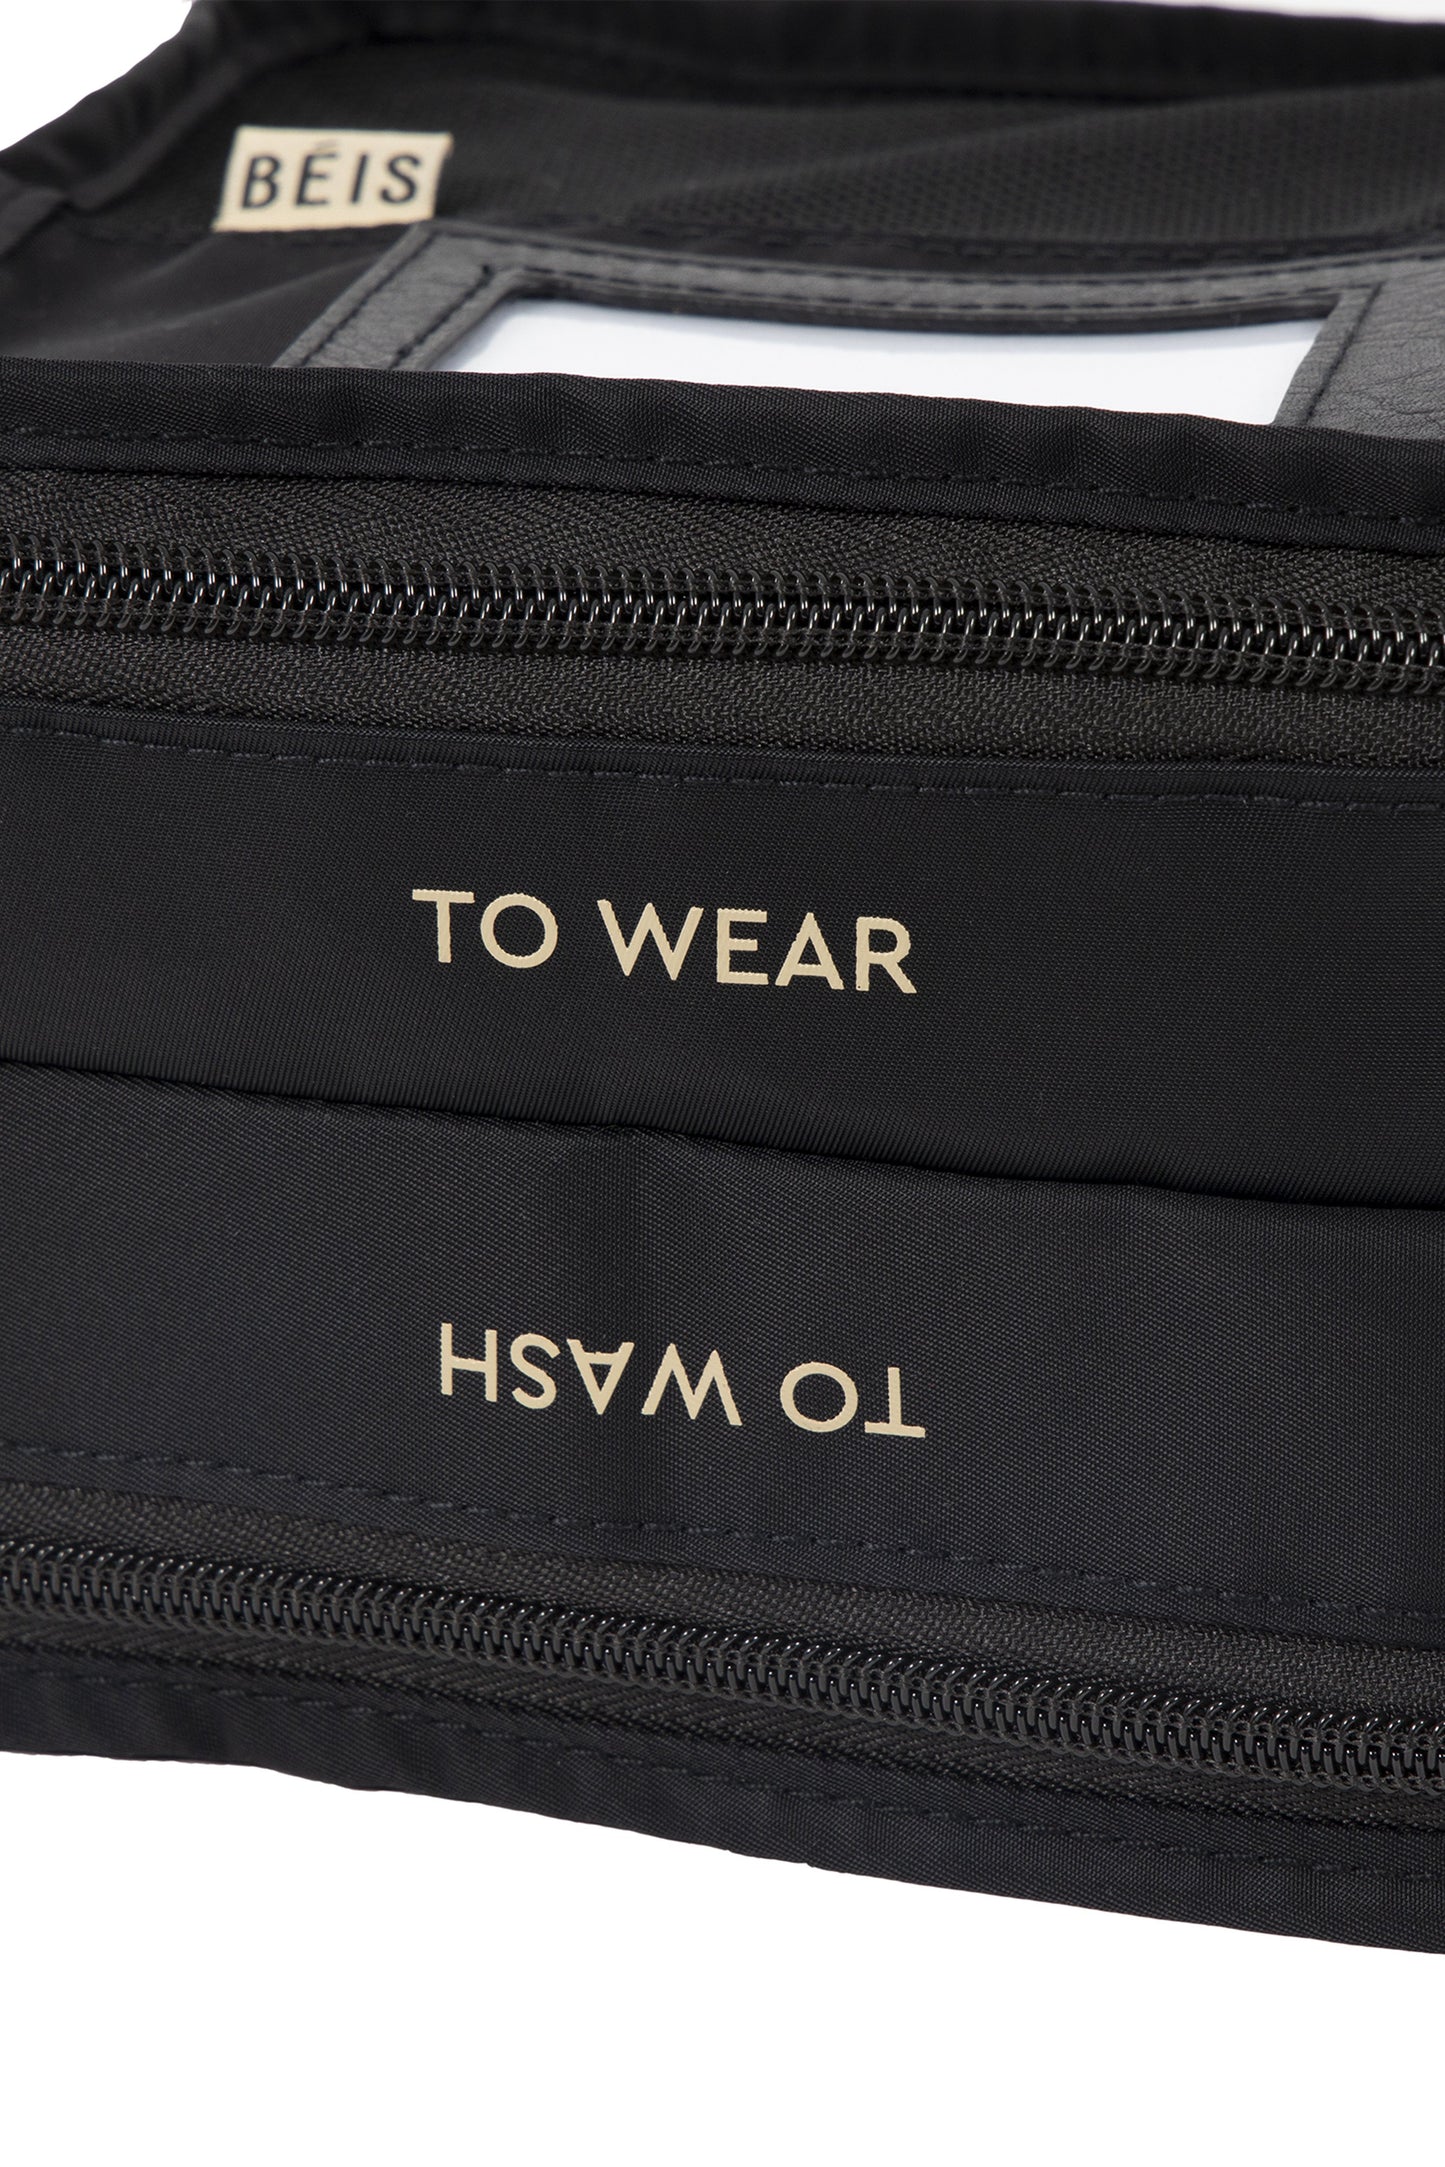 Close up, displaying the gold writing on bag, "to wash" and "to wear"